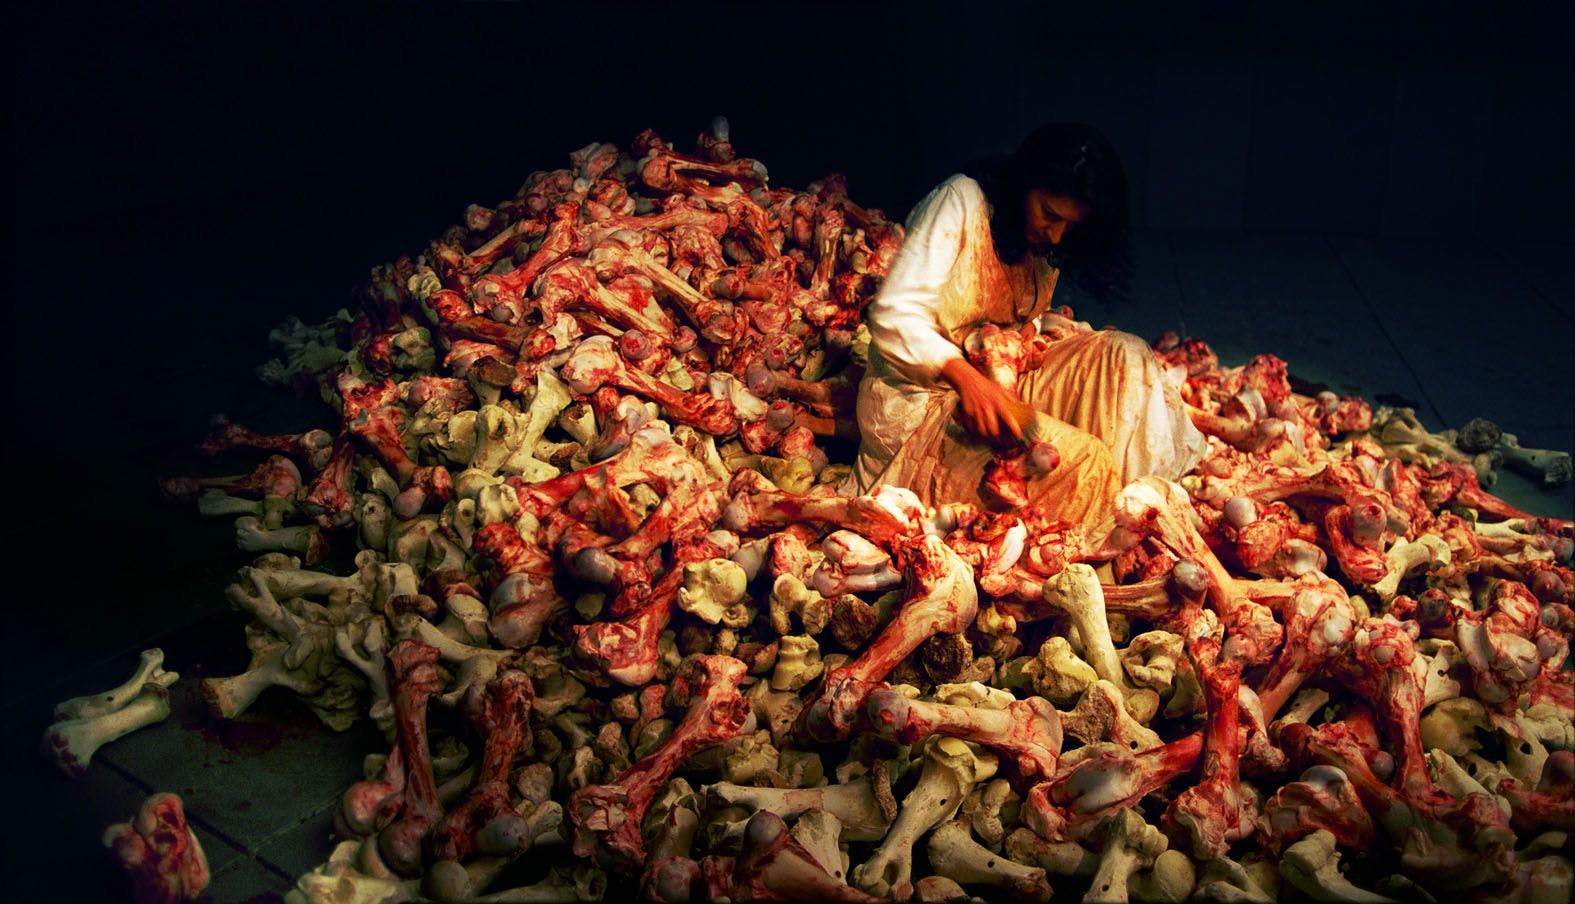 Photo of woman (the artist) sitting on a pile of bloody skeleton bones which she polishes with a coarse brush. From the performance Balkan Baroque by Marina Abramović in 1997